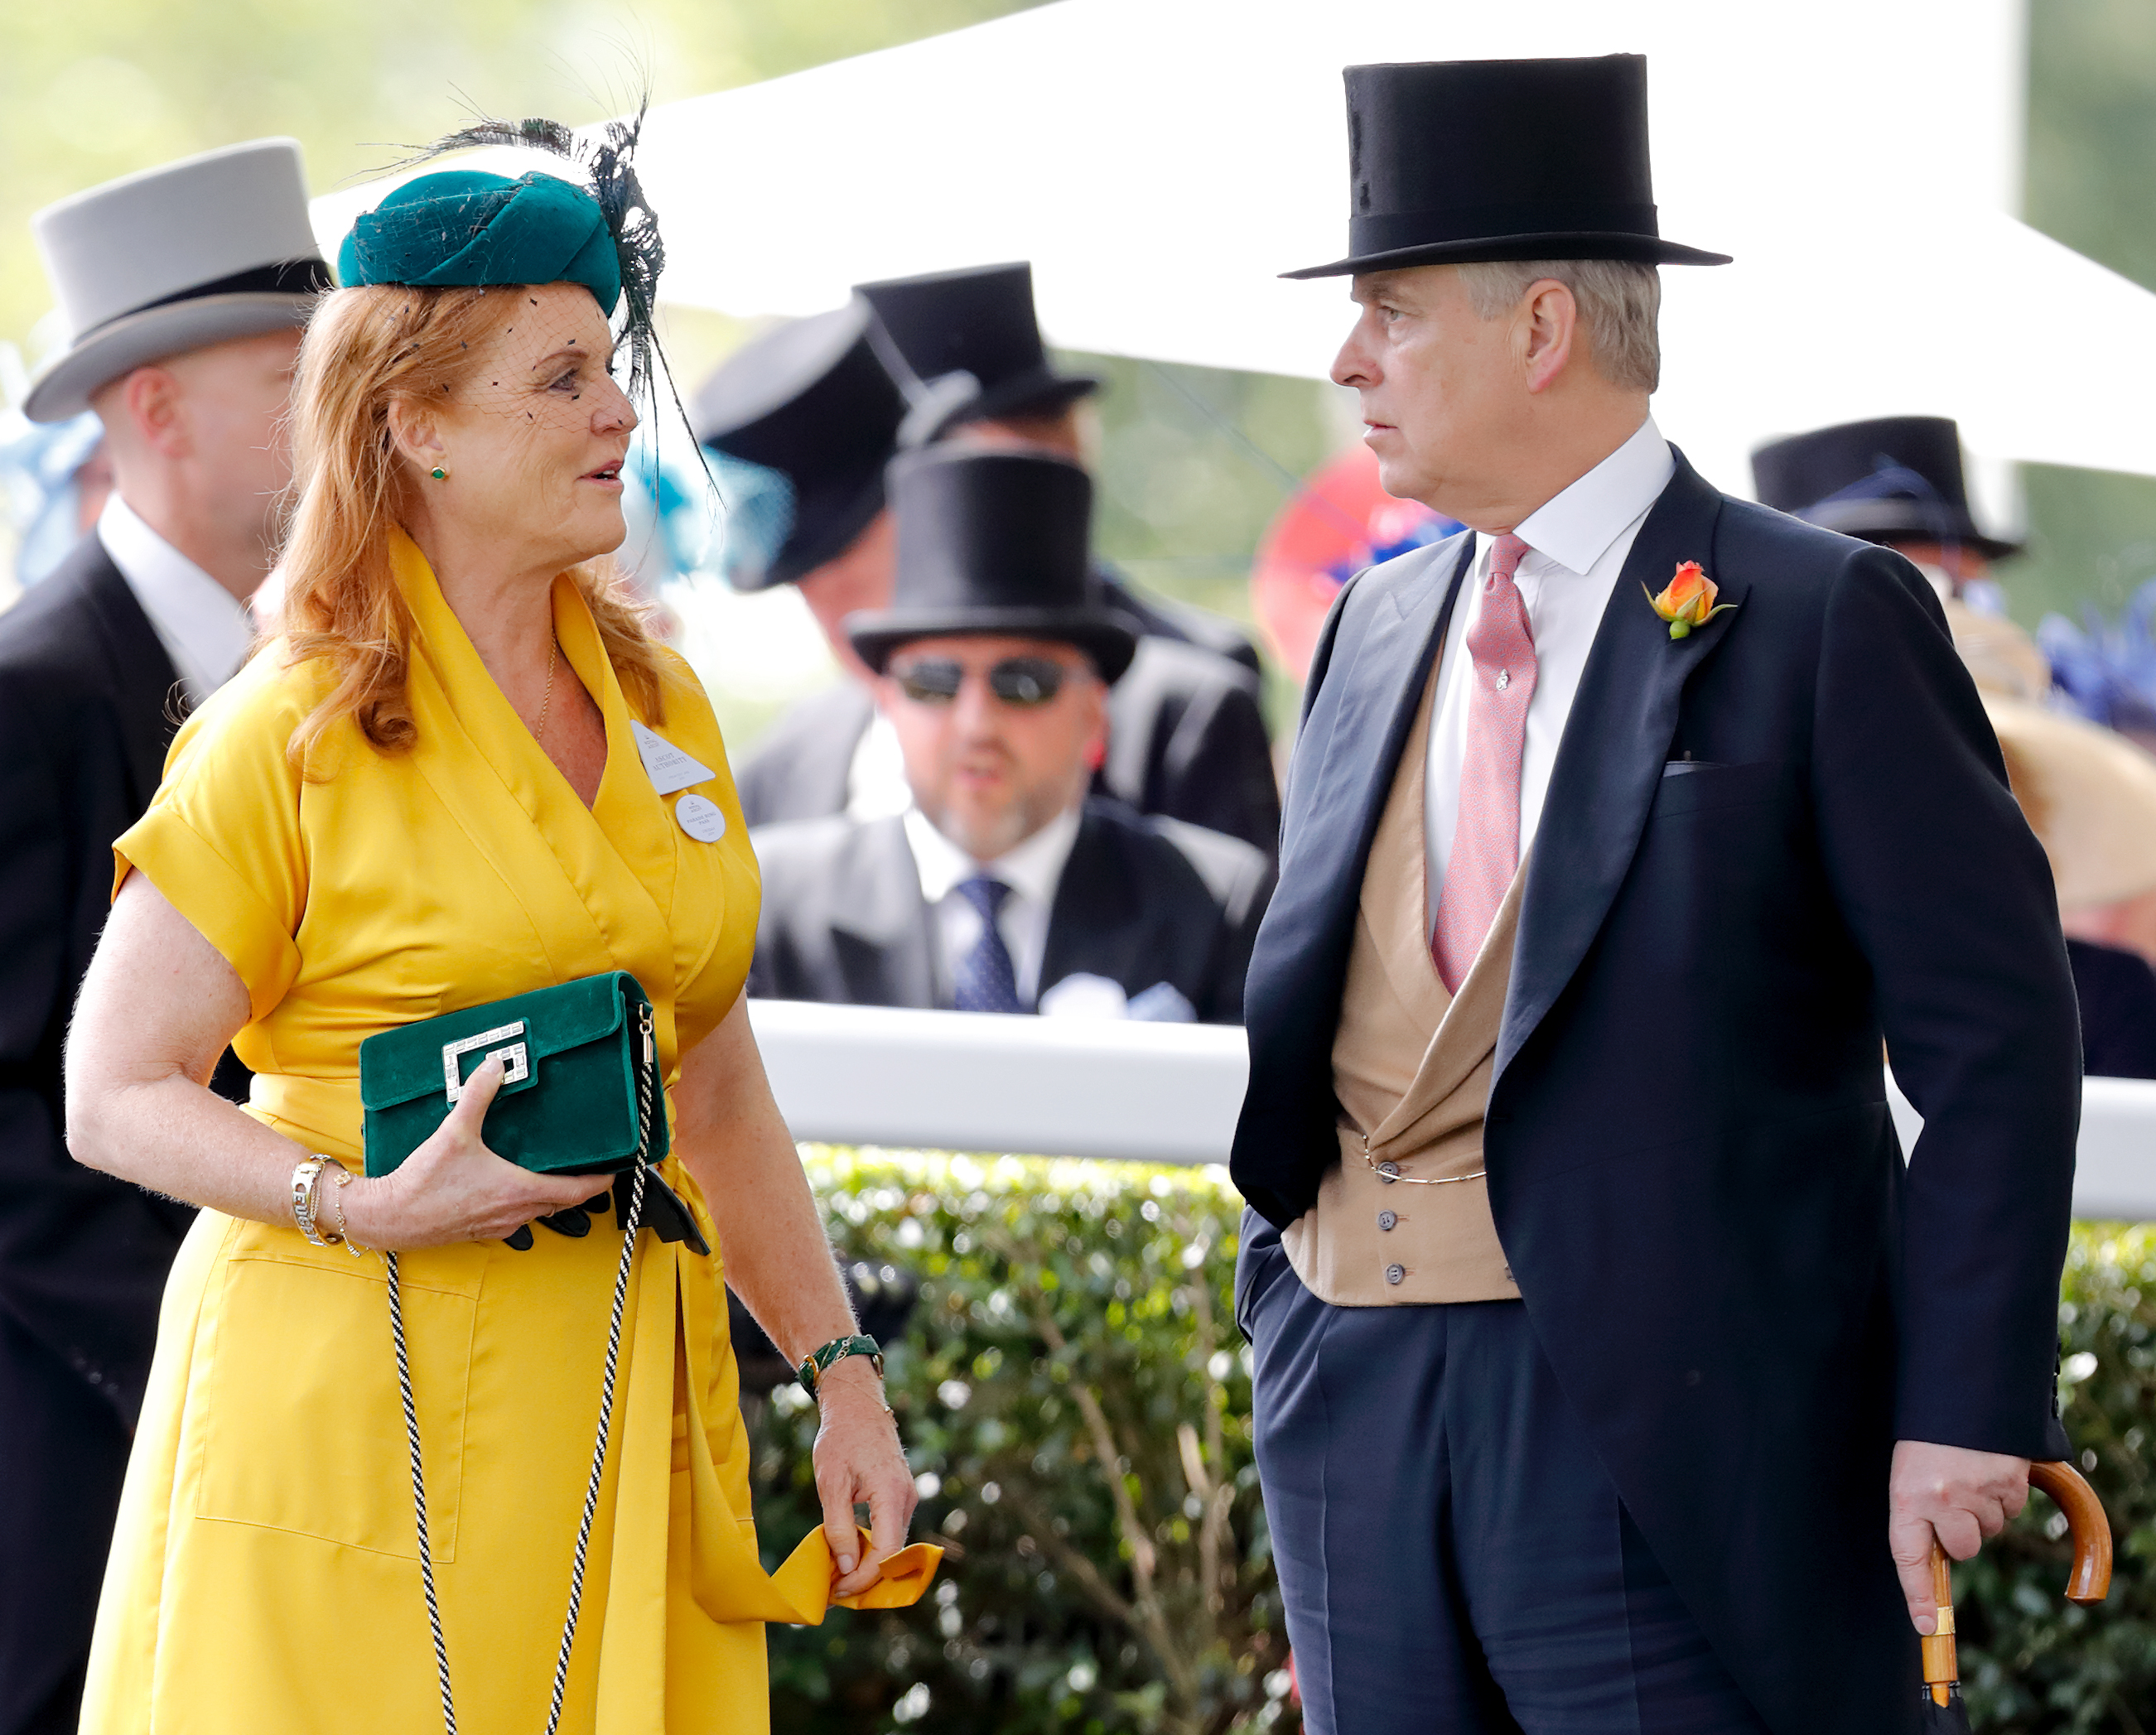 Duke and Duchess of York, Andrew and Sarah, at Ascot Racecourse in Ascot, England on June 21, 2019.